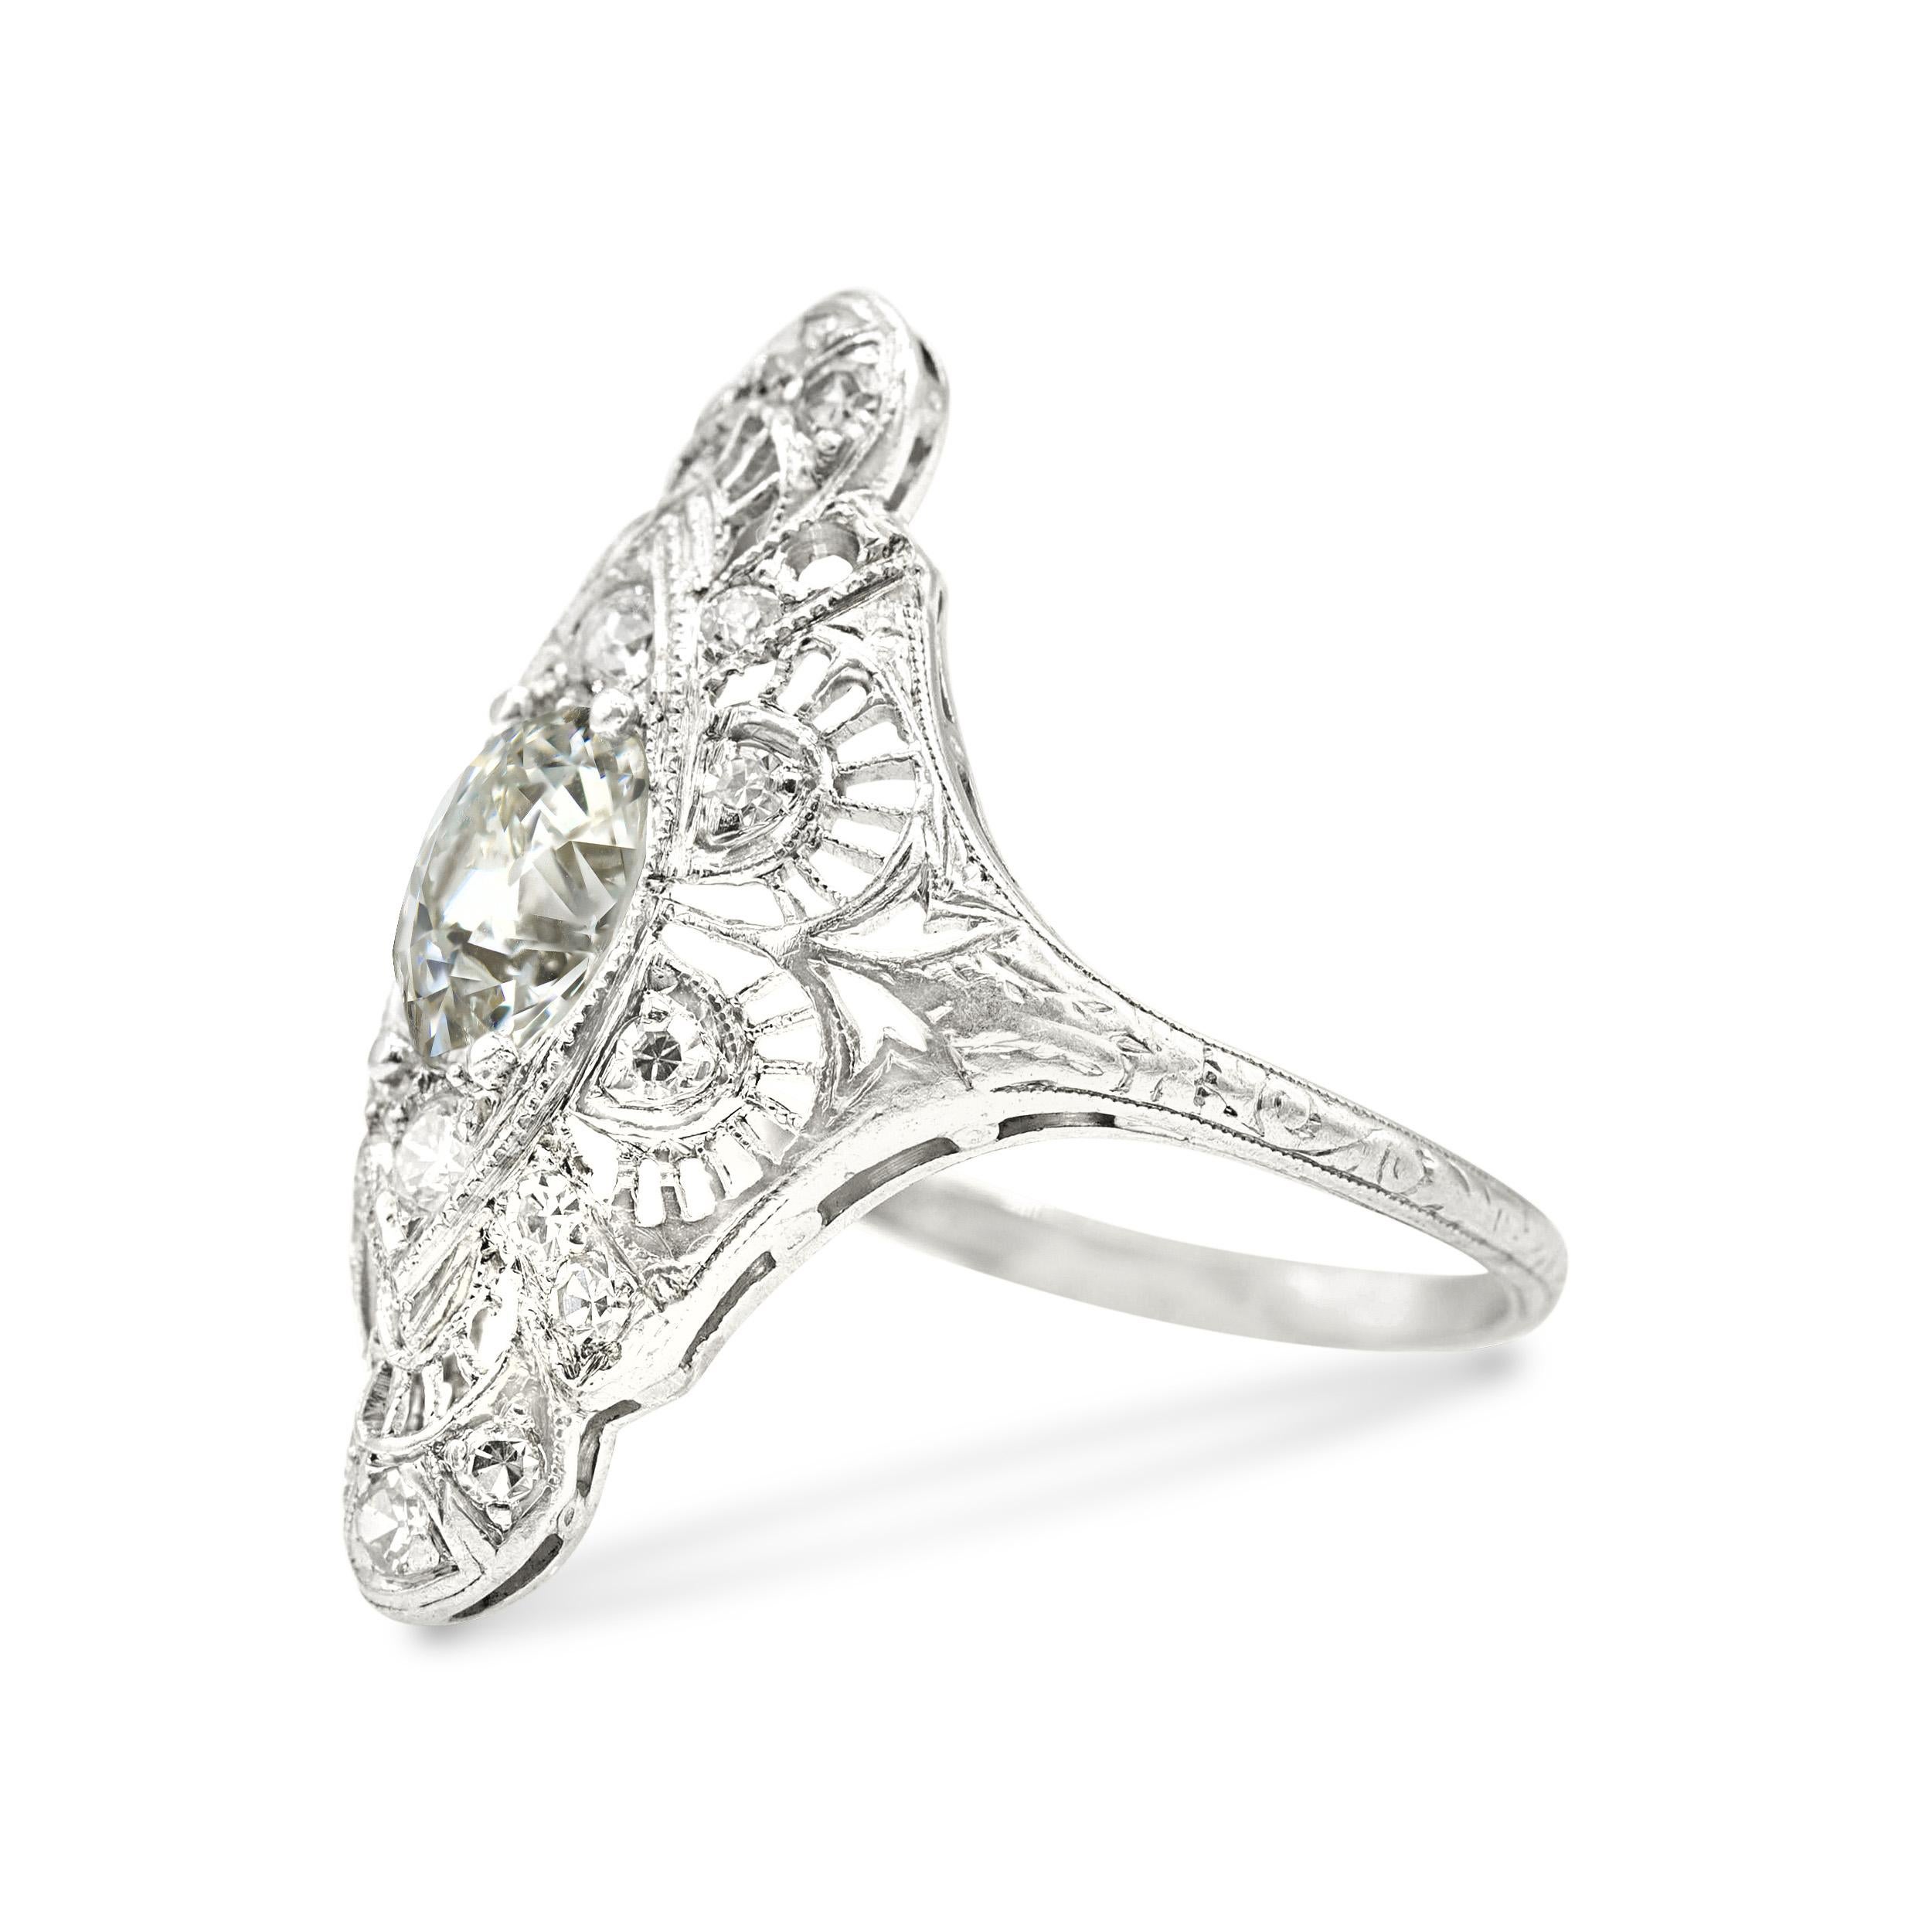 Edwardian 1.25 Ct. Old Mine Filigree Cocktail Ring I-J SI2-I1 in Platinum In Good Condition For Sale In New York, NY